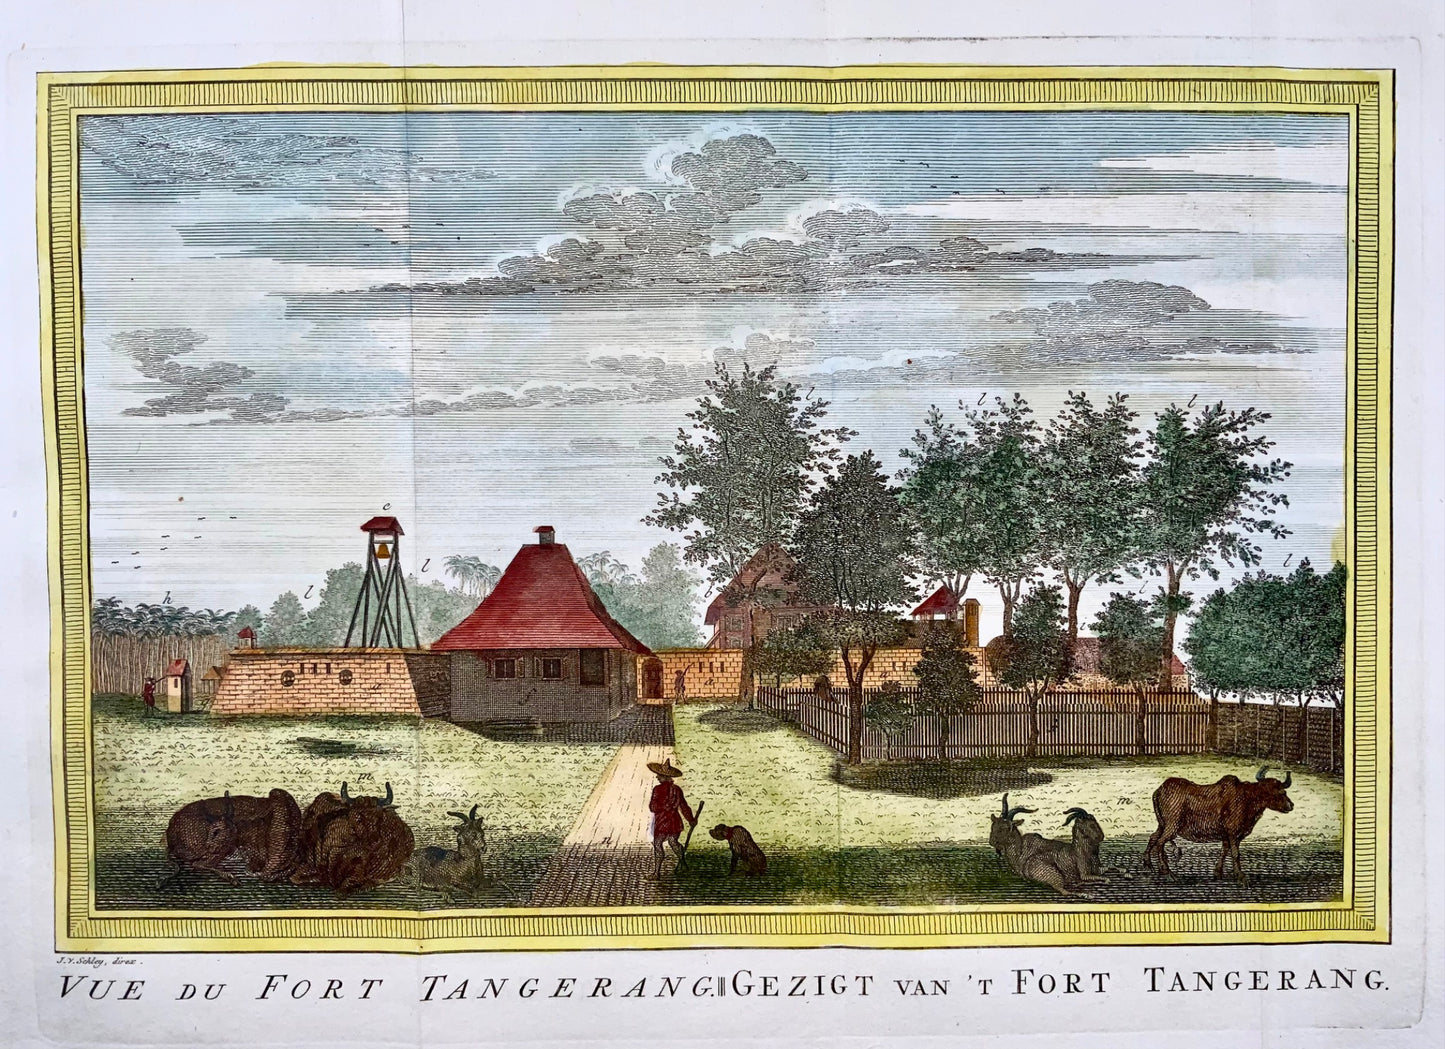 1763 J. Schley, view of Fort Tangerang, Indonesia, hand coloured folio, foreign topography